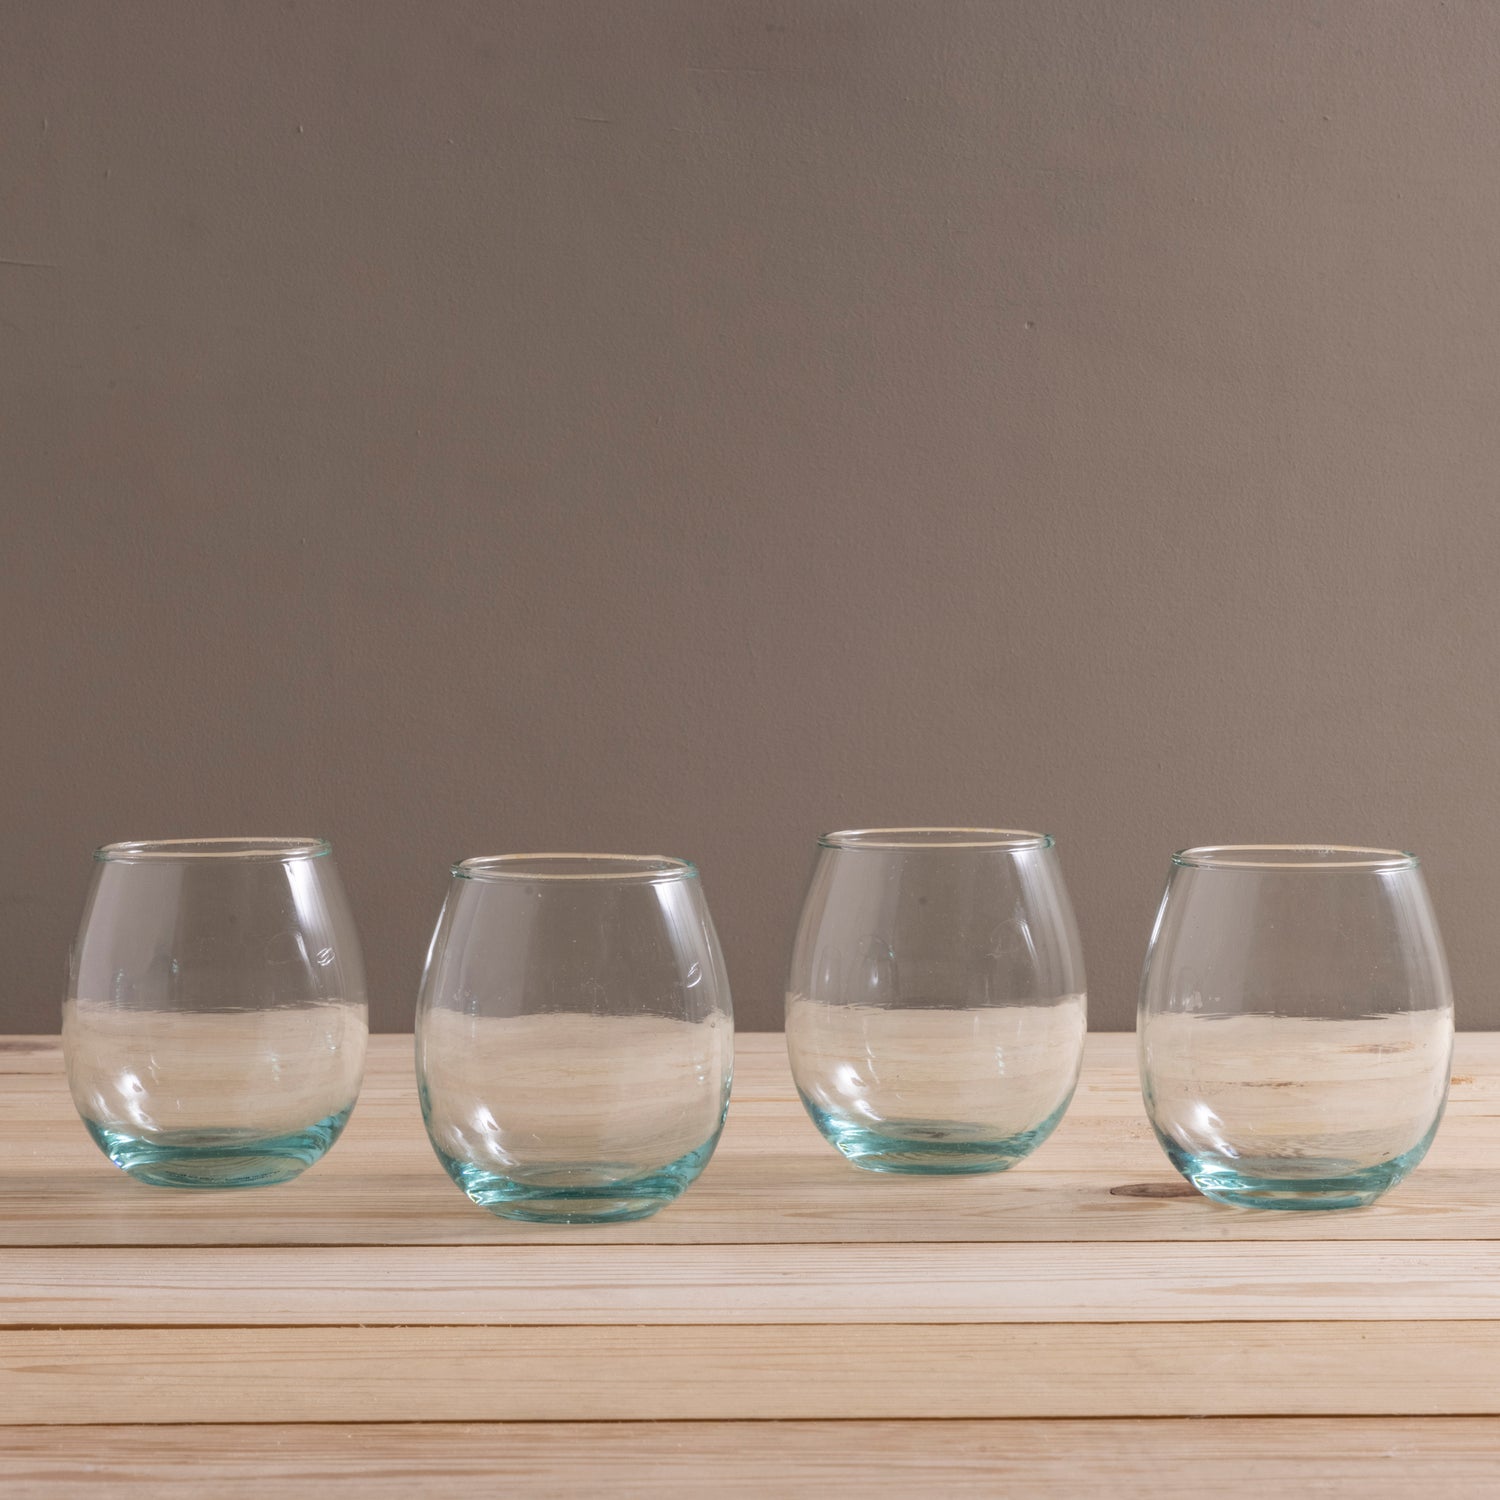 Be Home Premium Recycled Stemless Champagne Flutes (Set of 4)